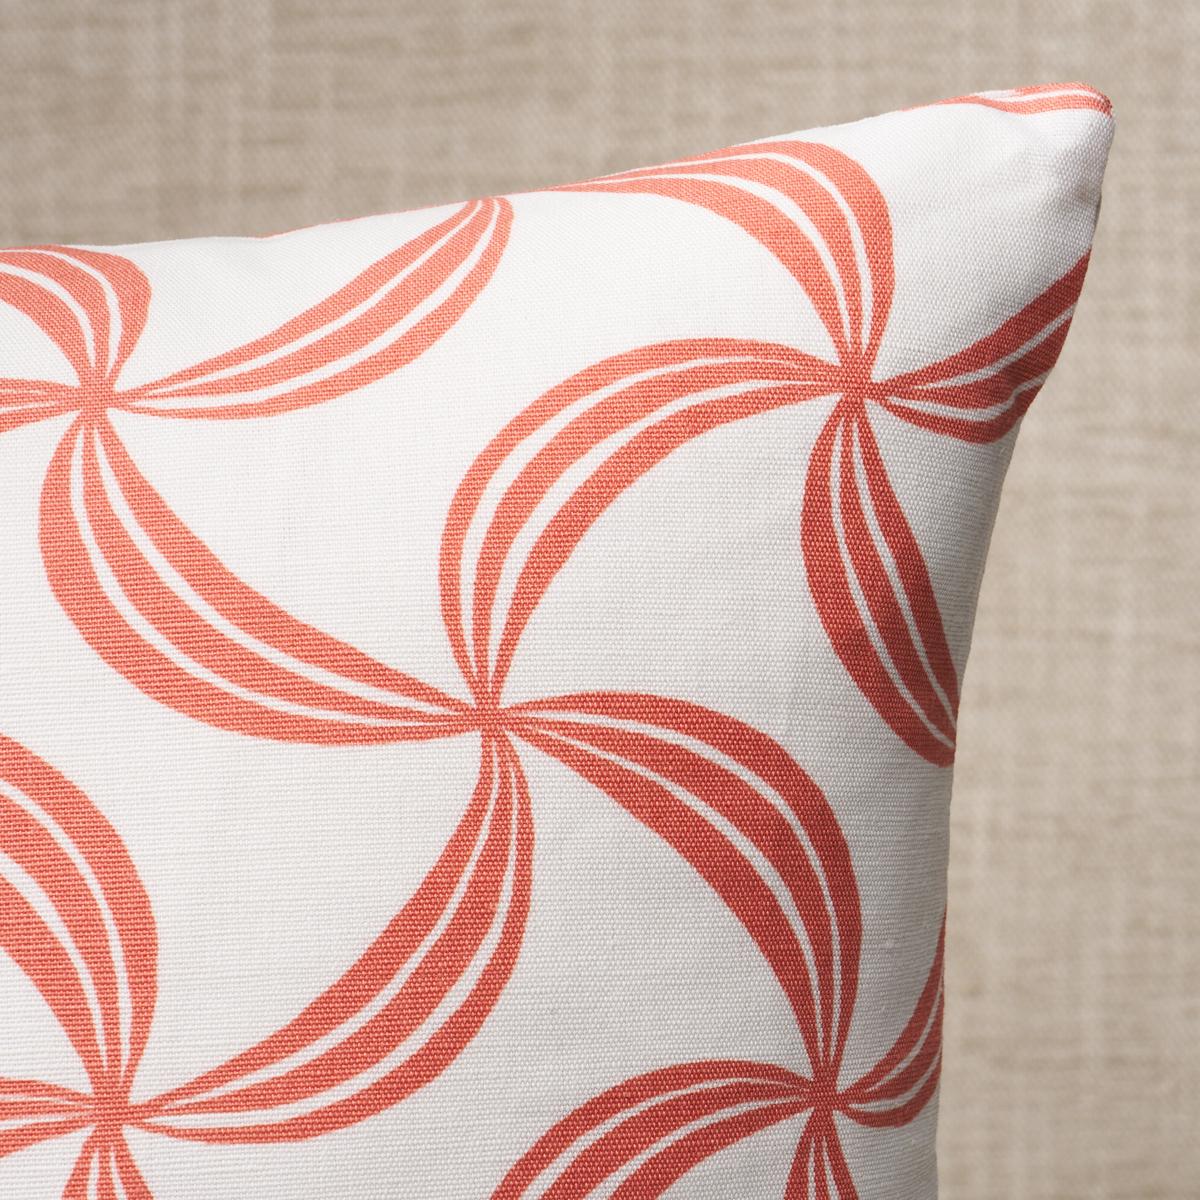 This pillow features Ambrosia with a knife edge finish. Ambrosia is a swirling, graphic pinwheel pattern with an intriguing hypnotic effect. Pillow includes a feather/down fill insert and hidden zipper closure.